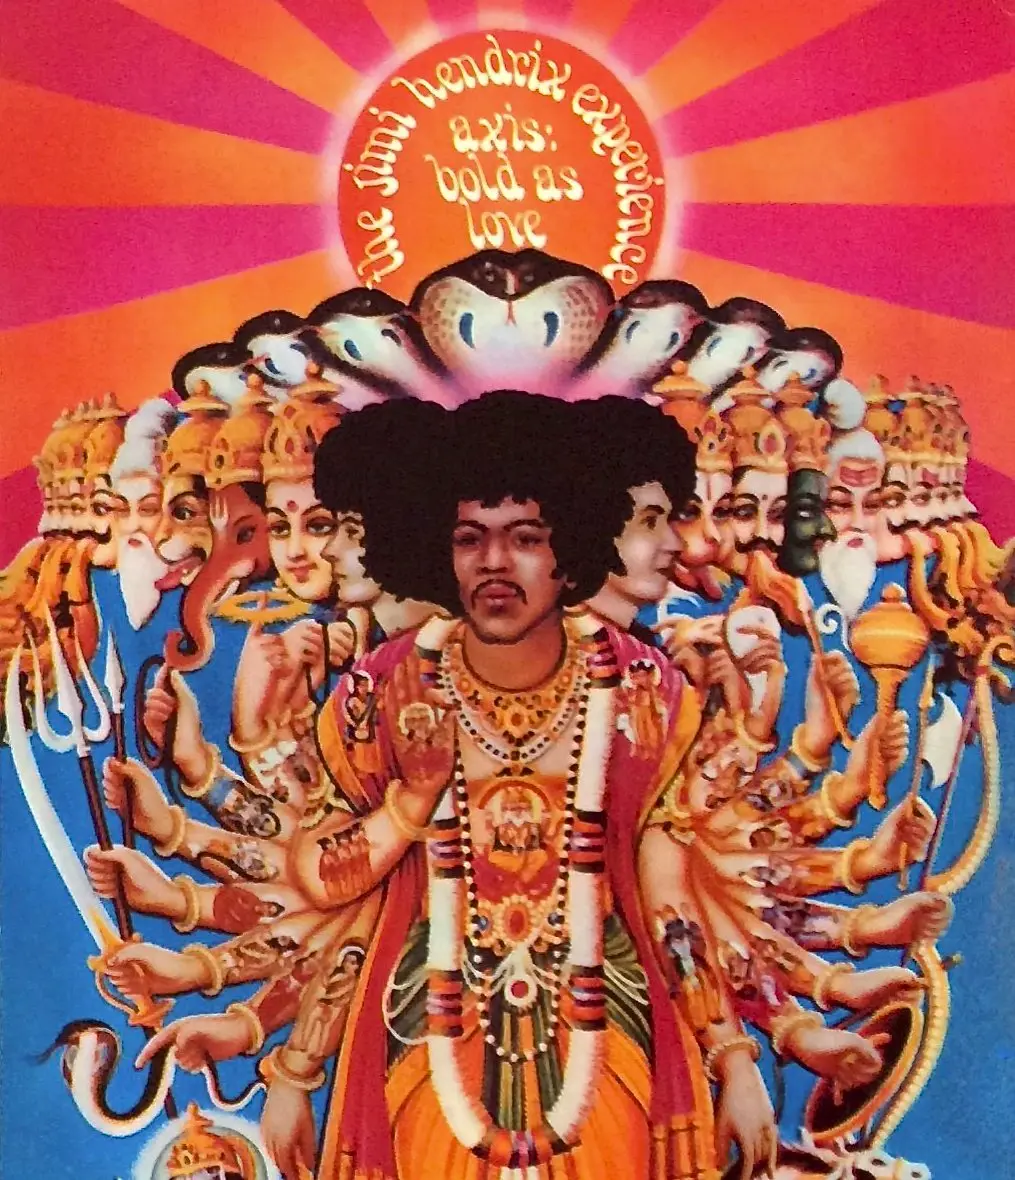 psychedelic graphic design jimmy hendrix